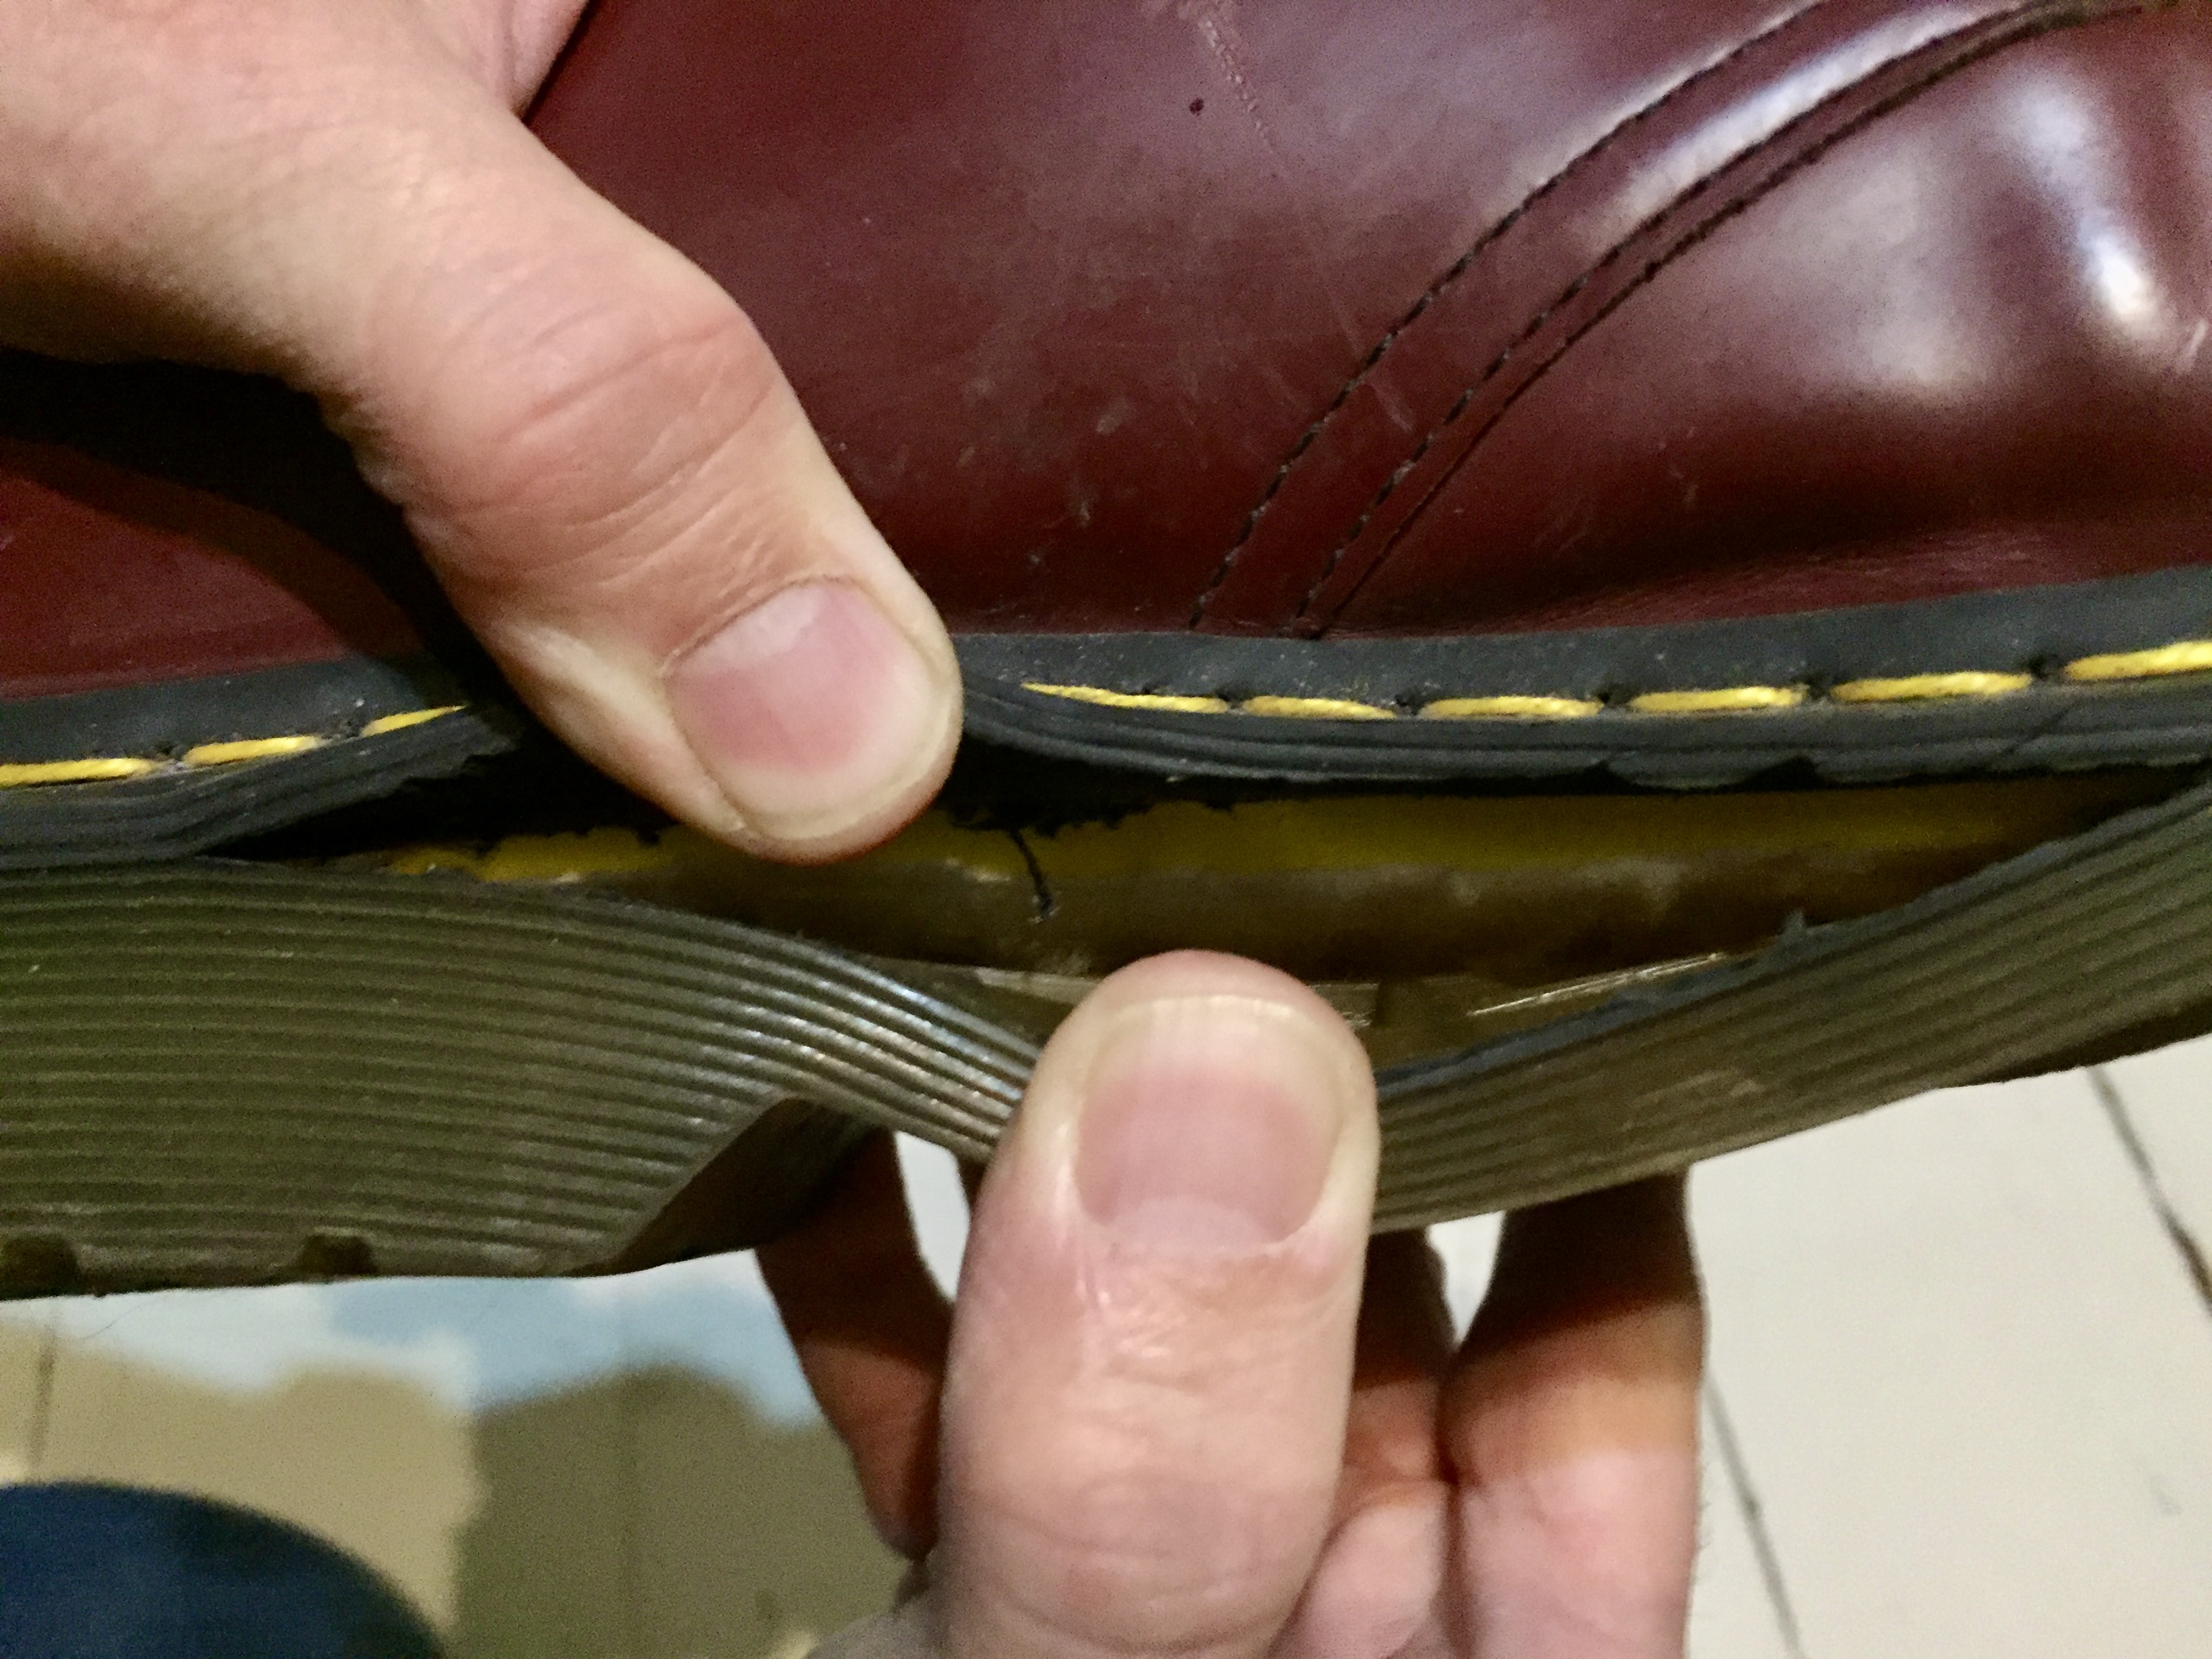 Dr. Martens on Twitter: "@IwanCruyff Unfortunately do not offer or repair services directly through Dr. However, you may want to contact Timpson as they do offer official Dr.